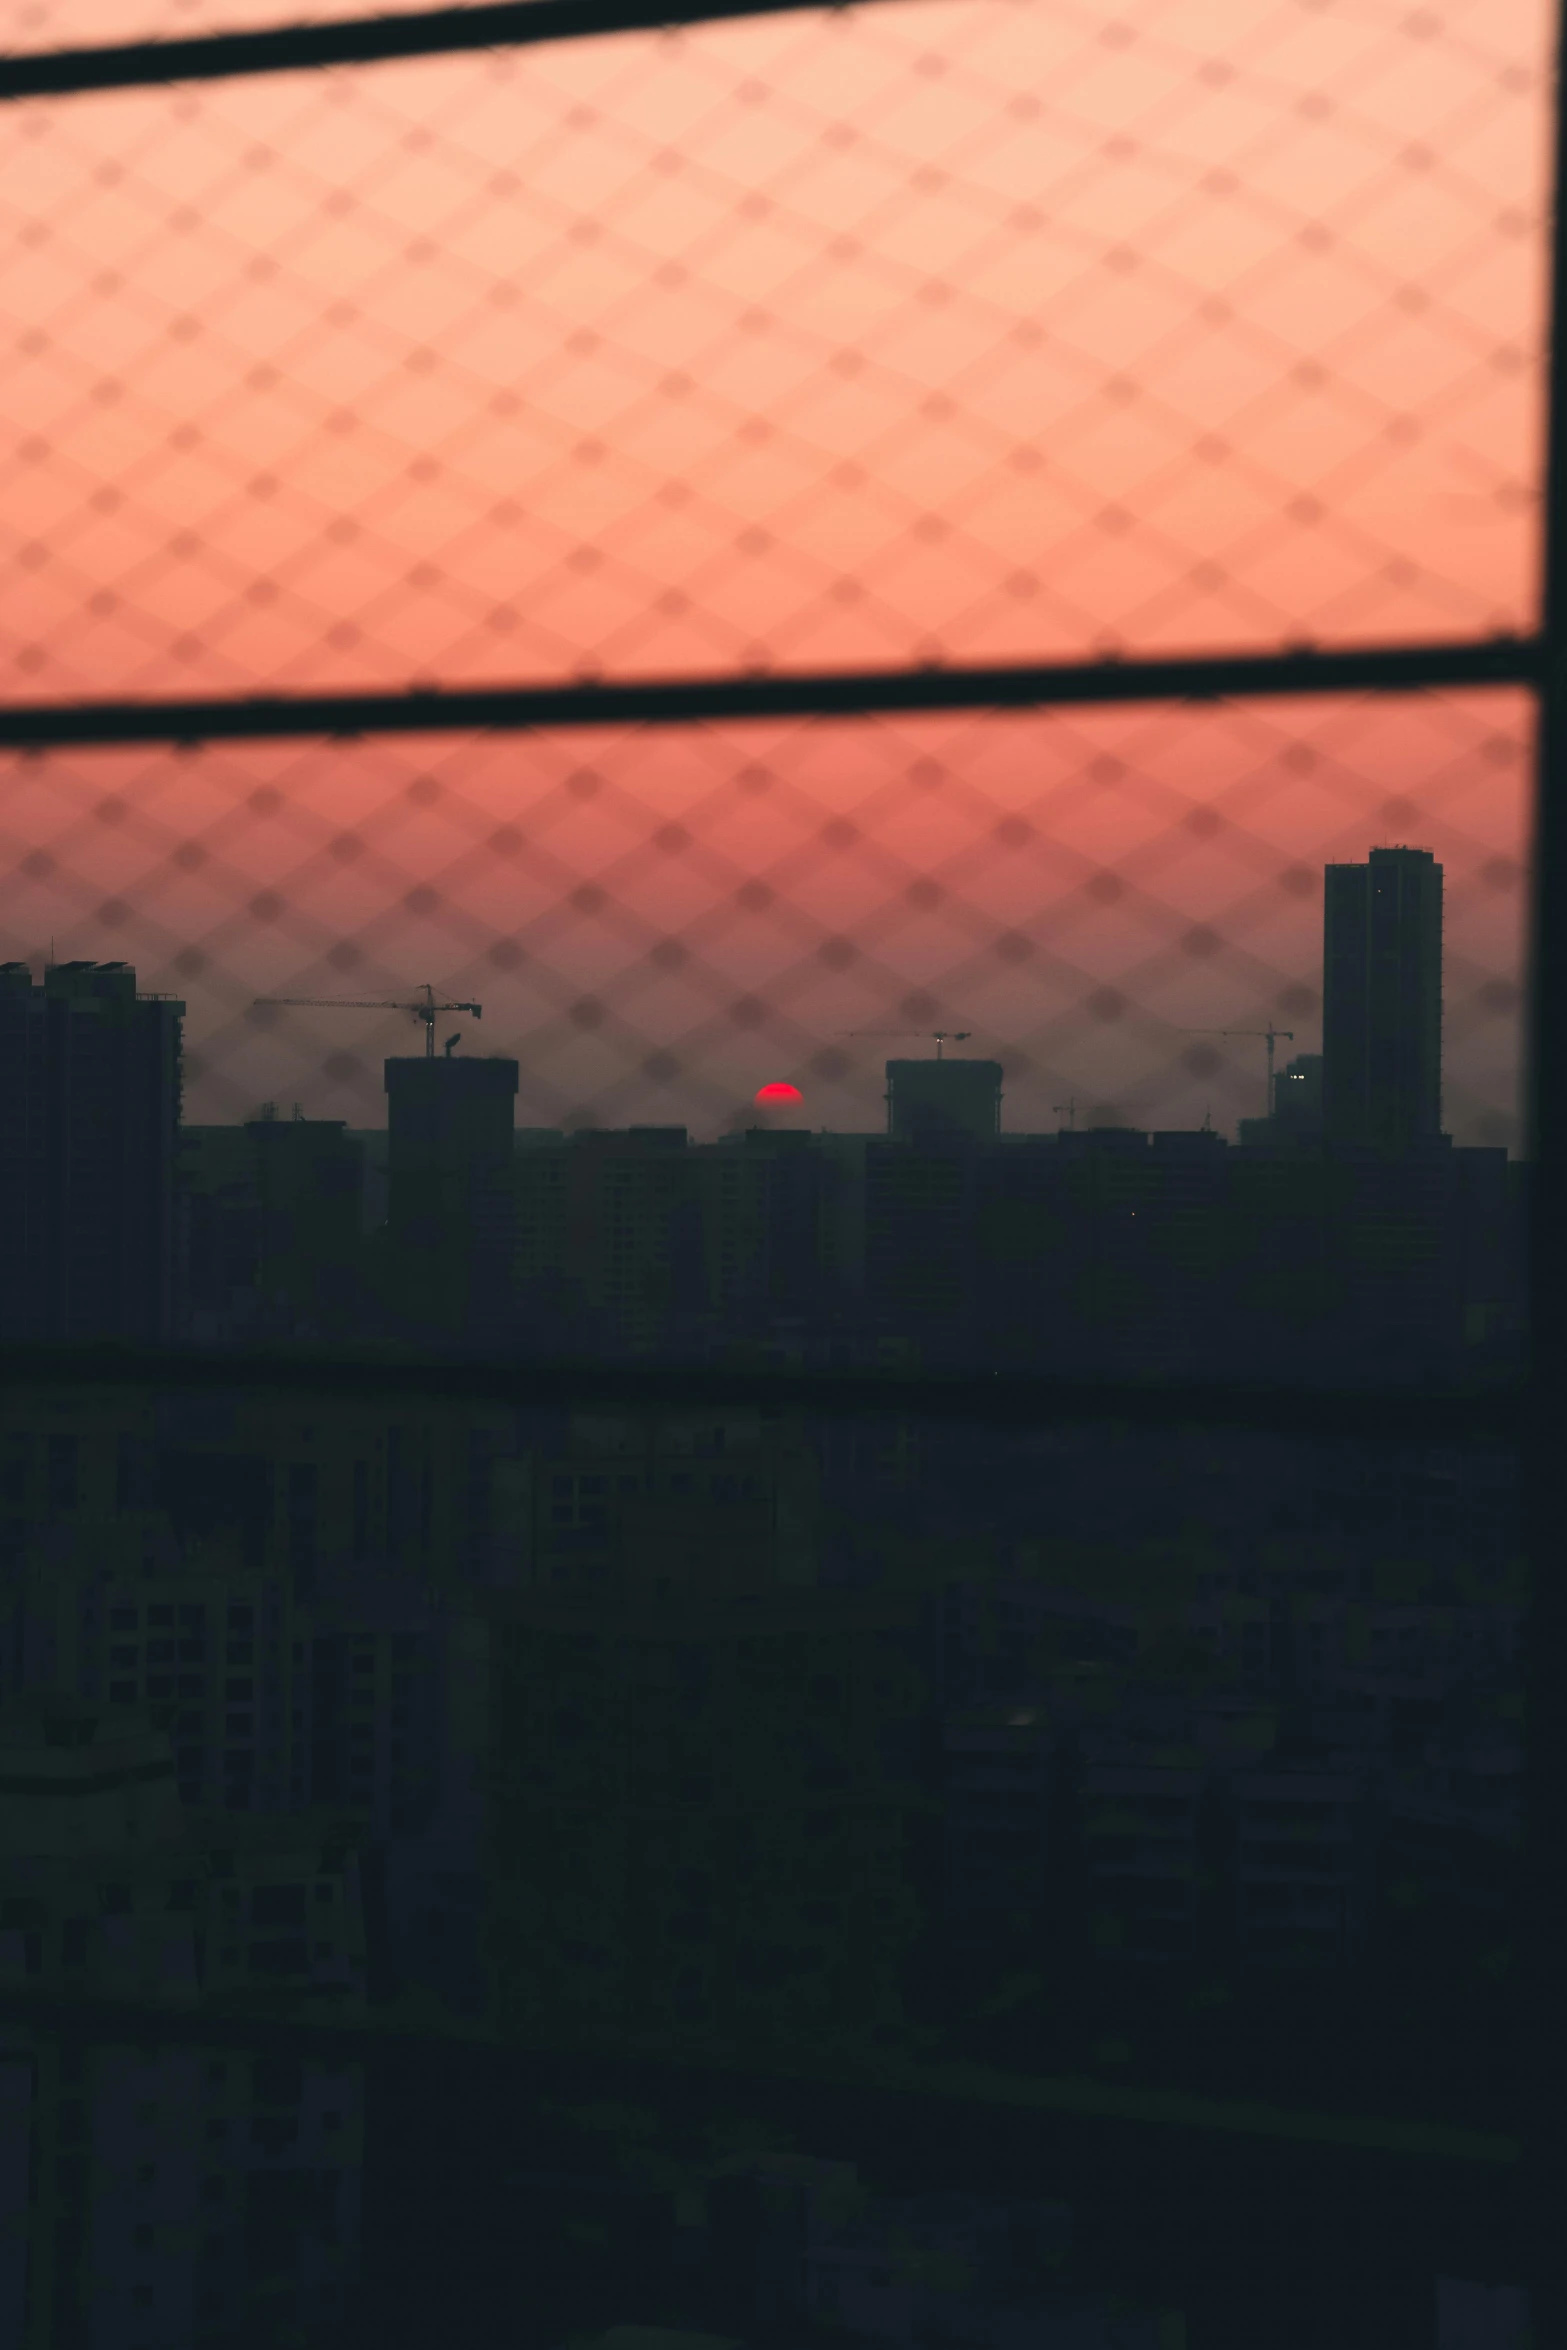 sunset viewed through a fence with distant buildings